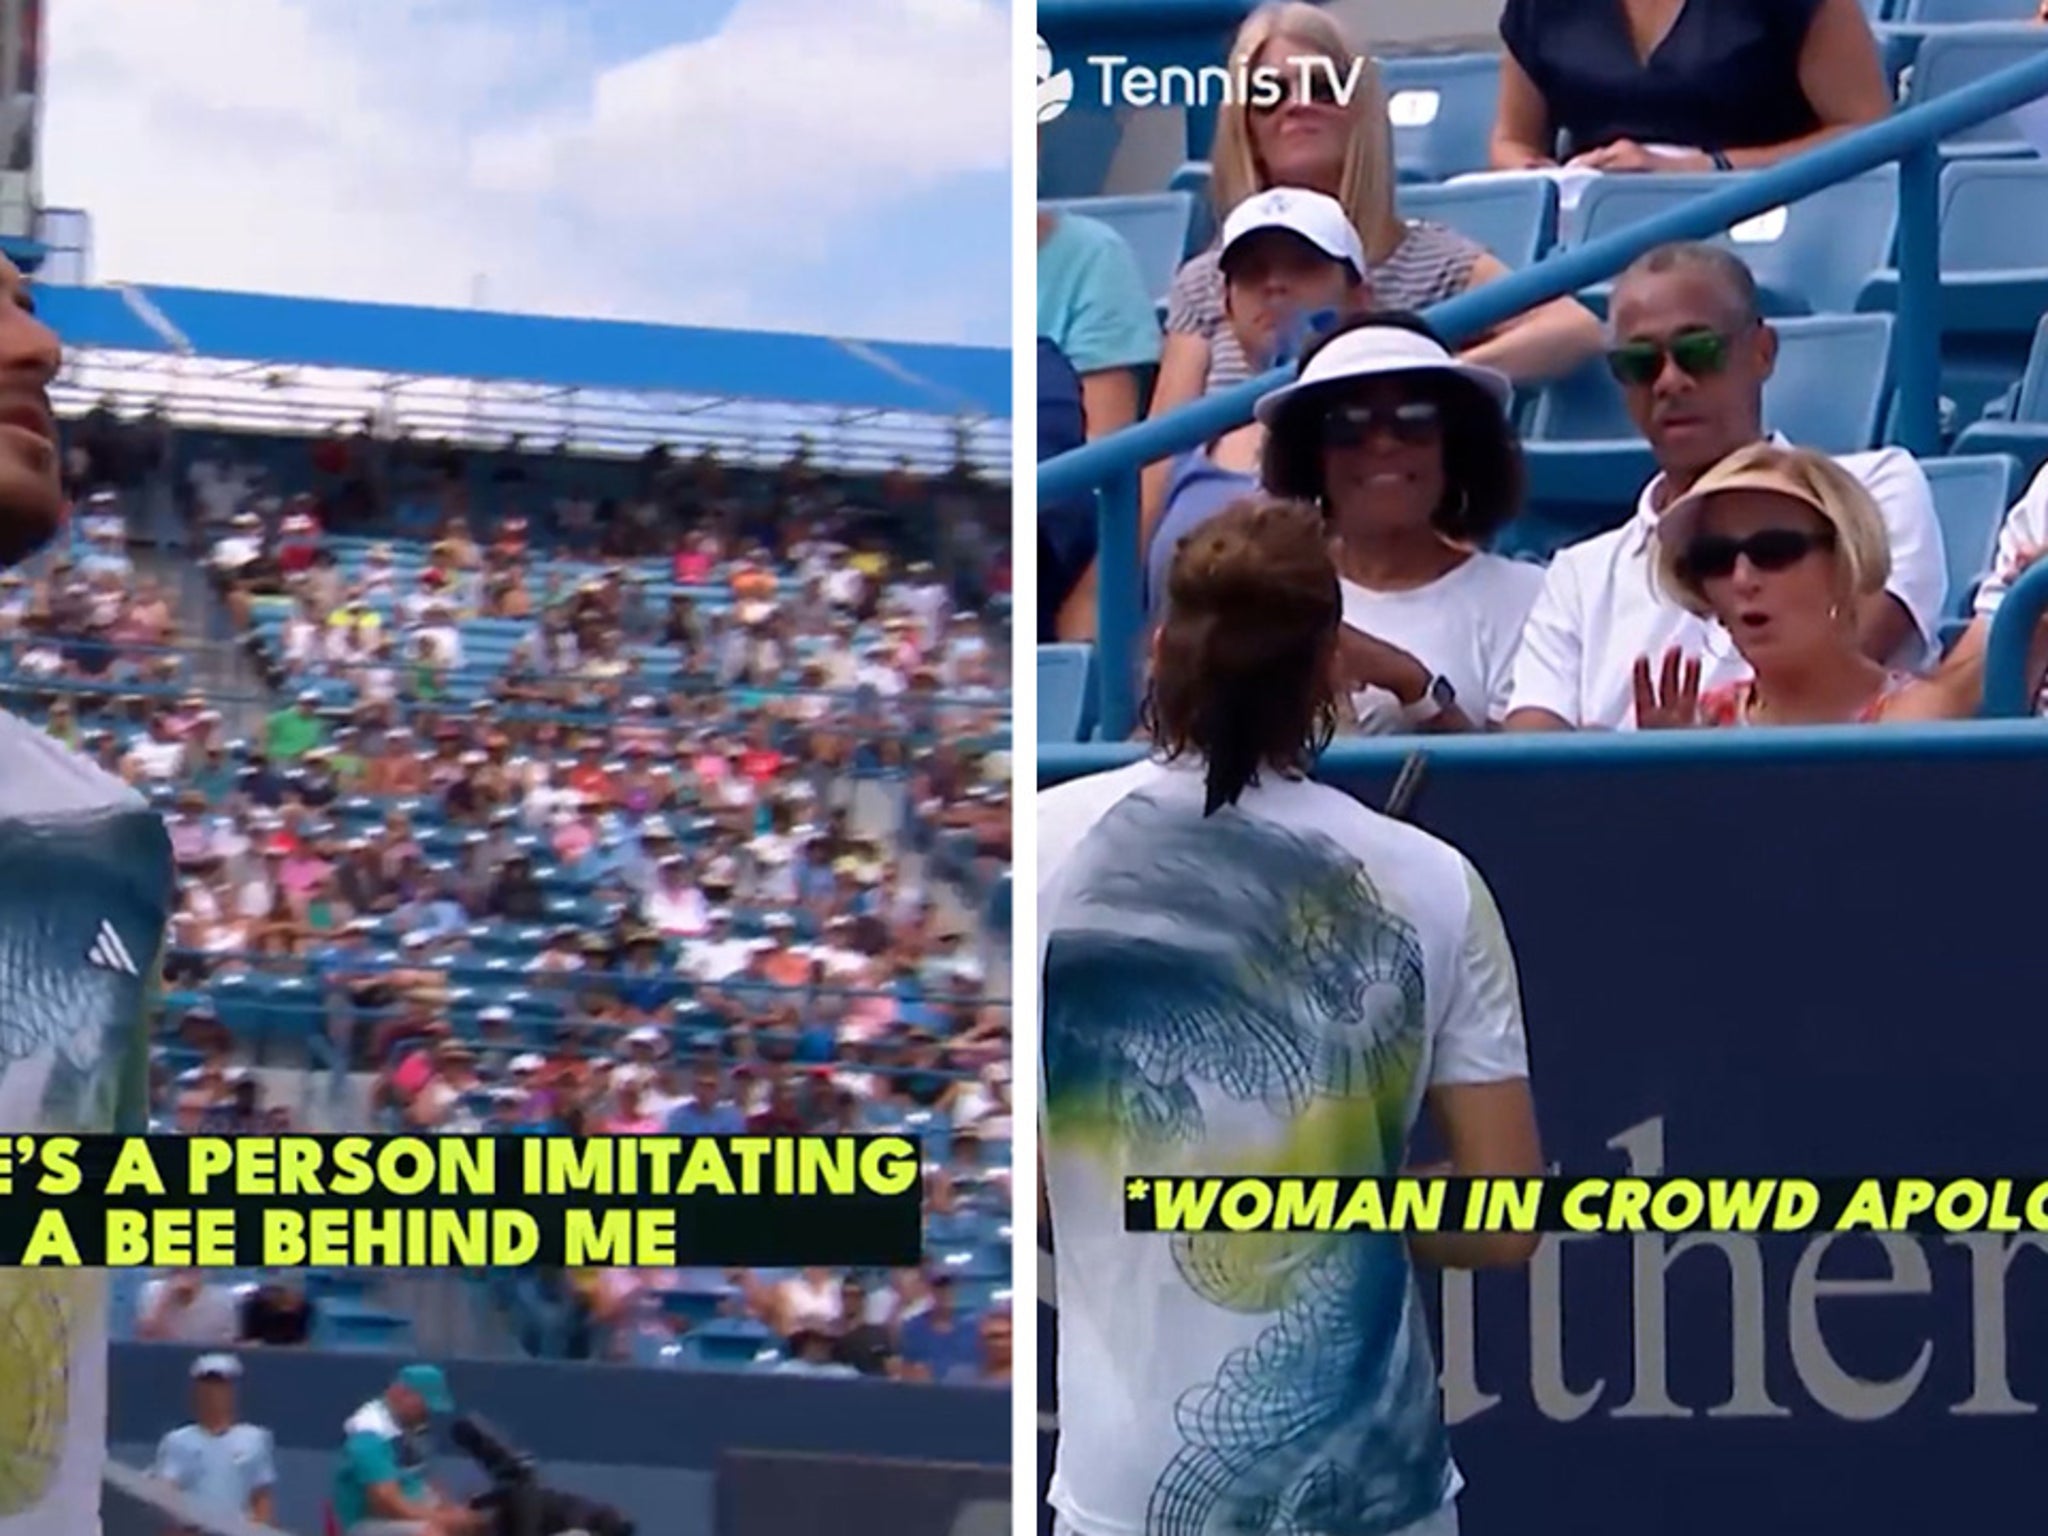 True student of the game and it showed this week”: Tennis fans